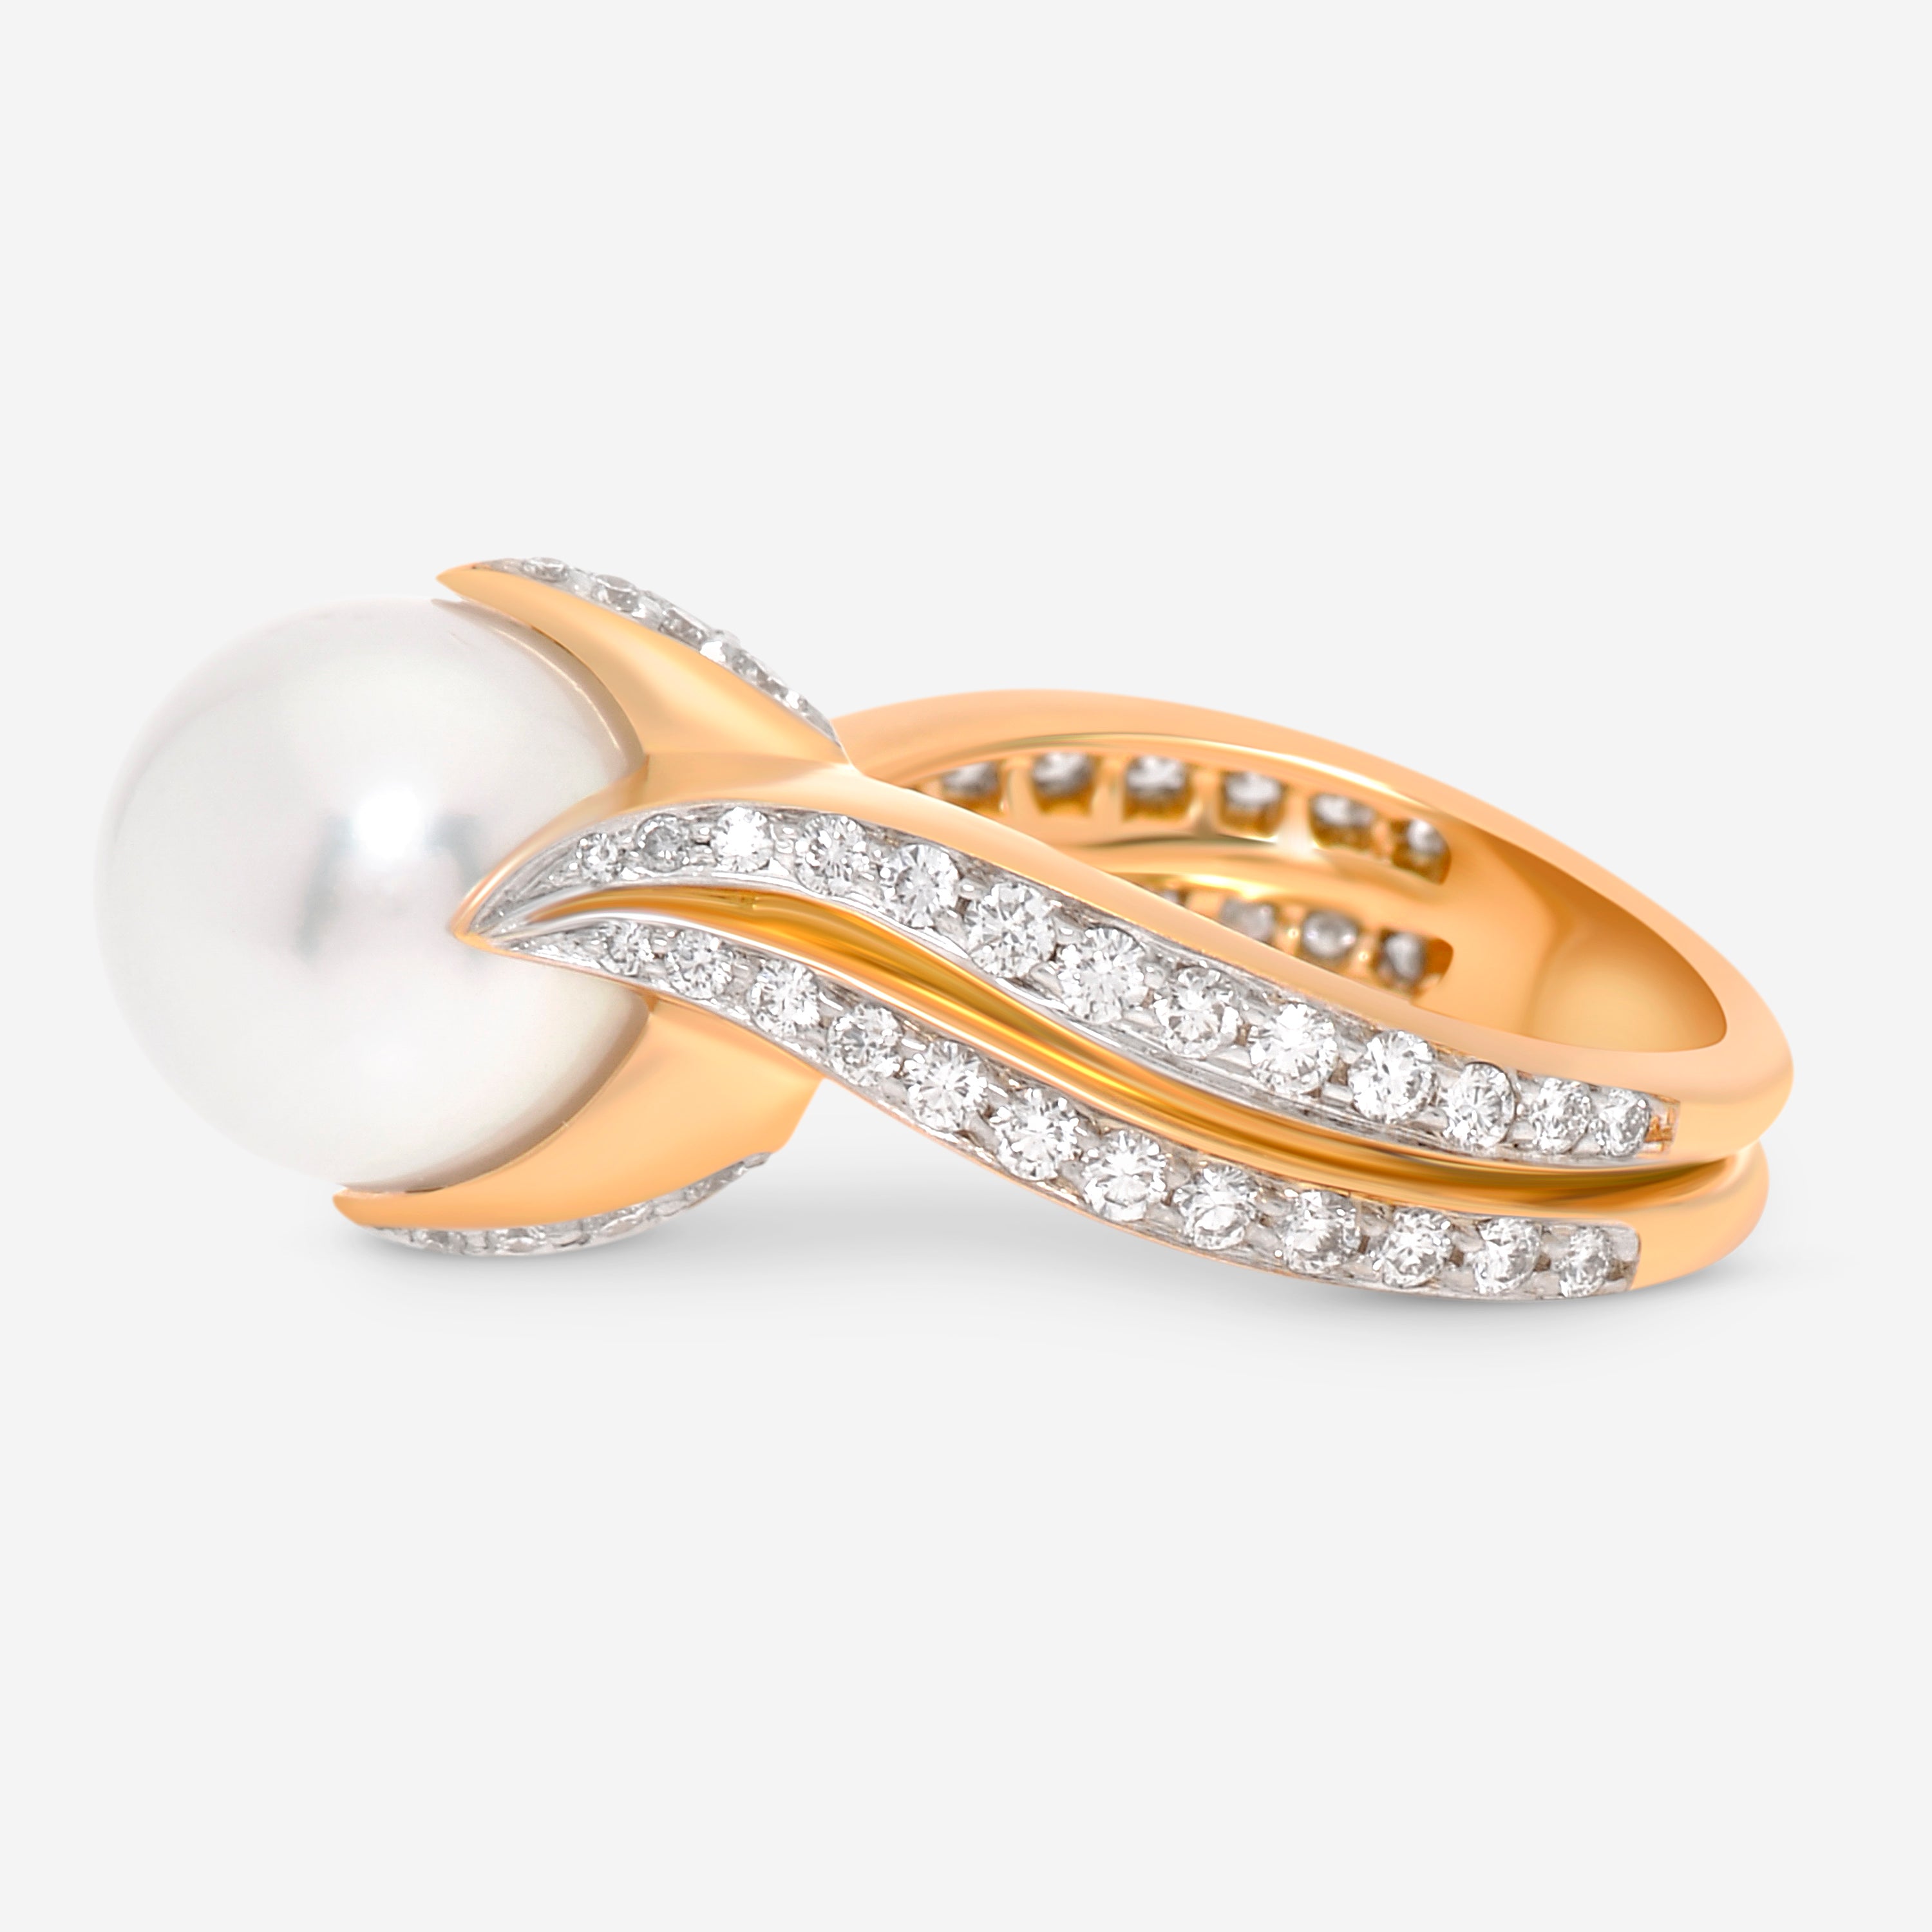 Assael Angela Cummings 18K Yellow Gold, South Sea Cultured Pearl and Diamond 0.89ct. tw. Band Ring Sz. 6.5 ACR0004 - THE SOLIST